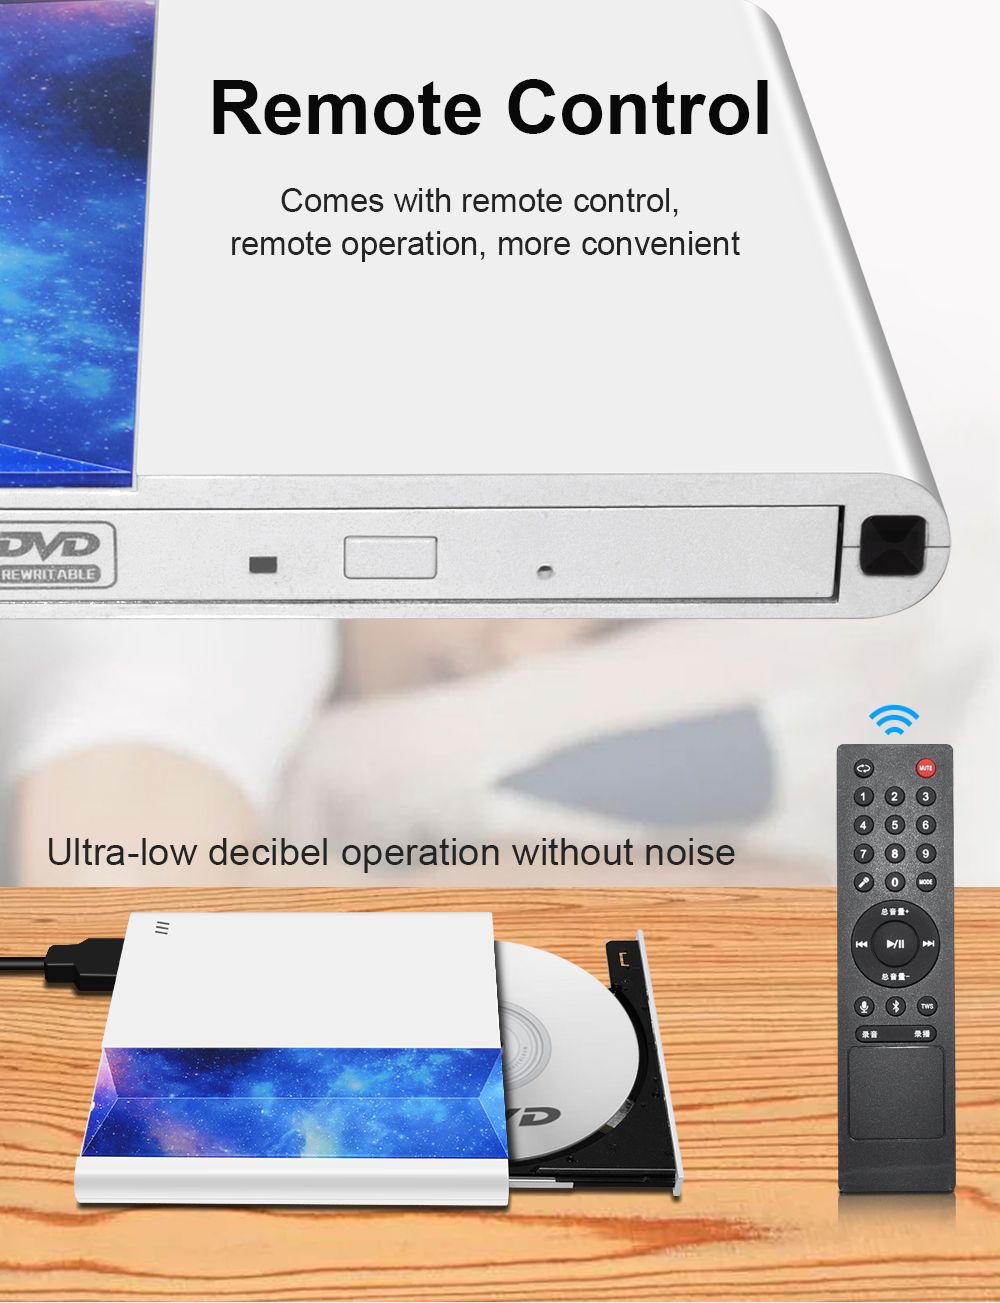 Deepfox-External-DVD-Optical-Drives-Support-Connecting-TV-with-USB-30-and-Type-C-Interface-Remote-Co-1711391